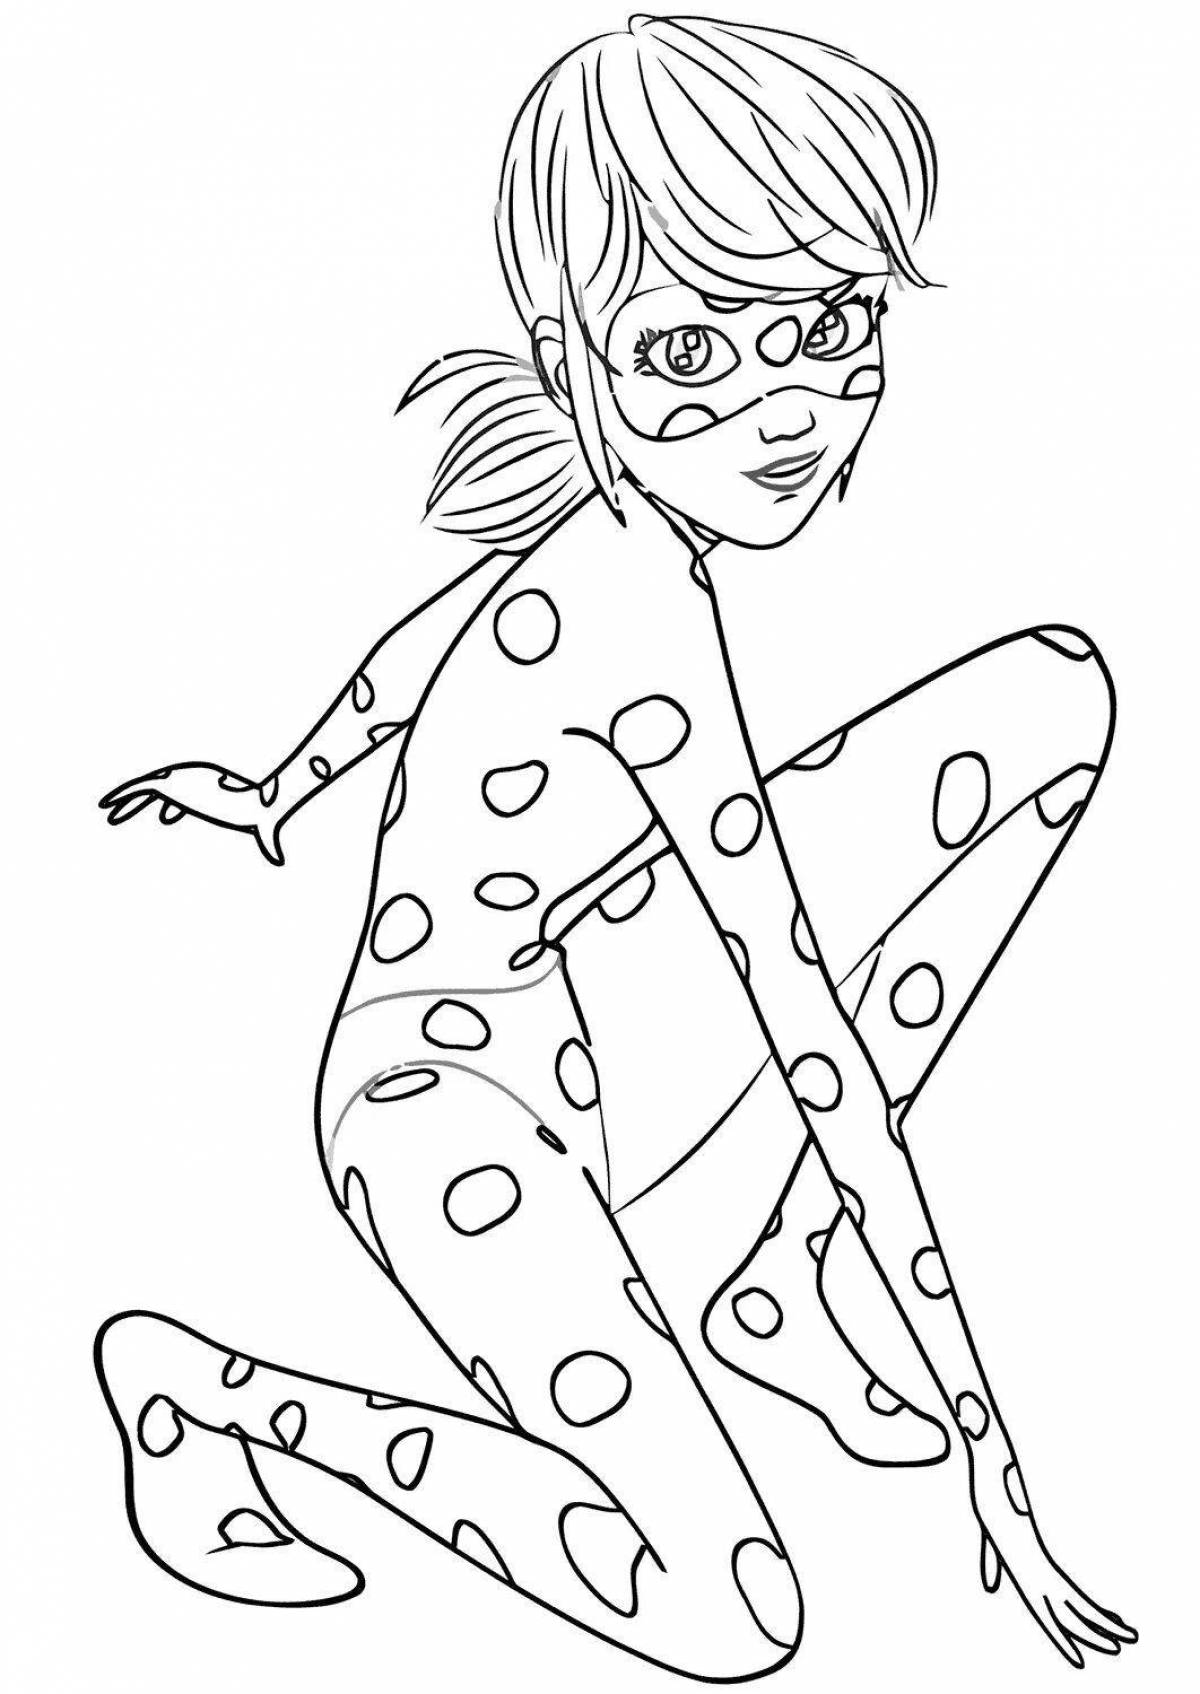 Lucky ladybug coloring book for kids